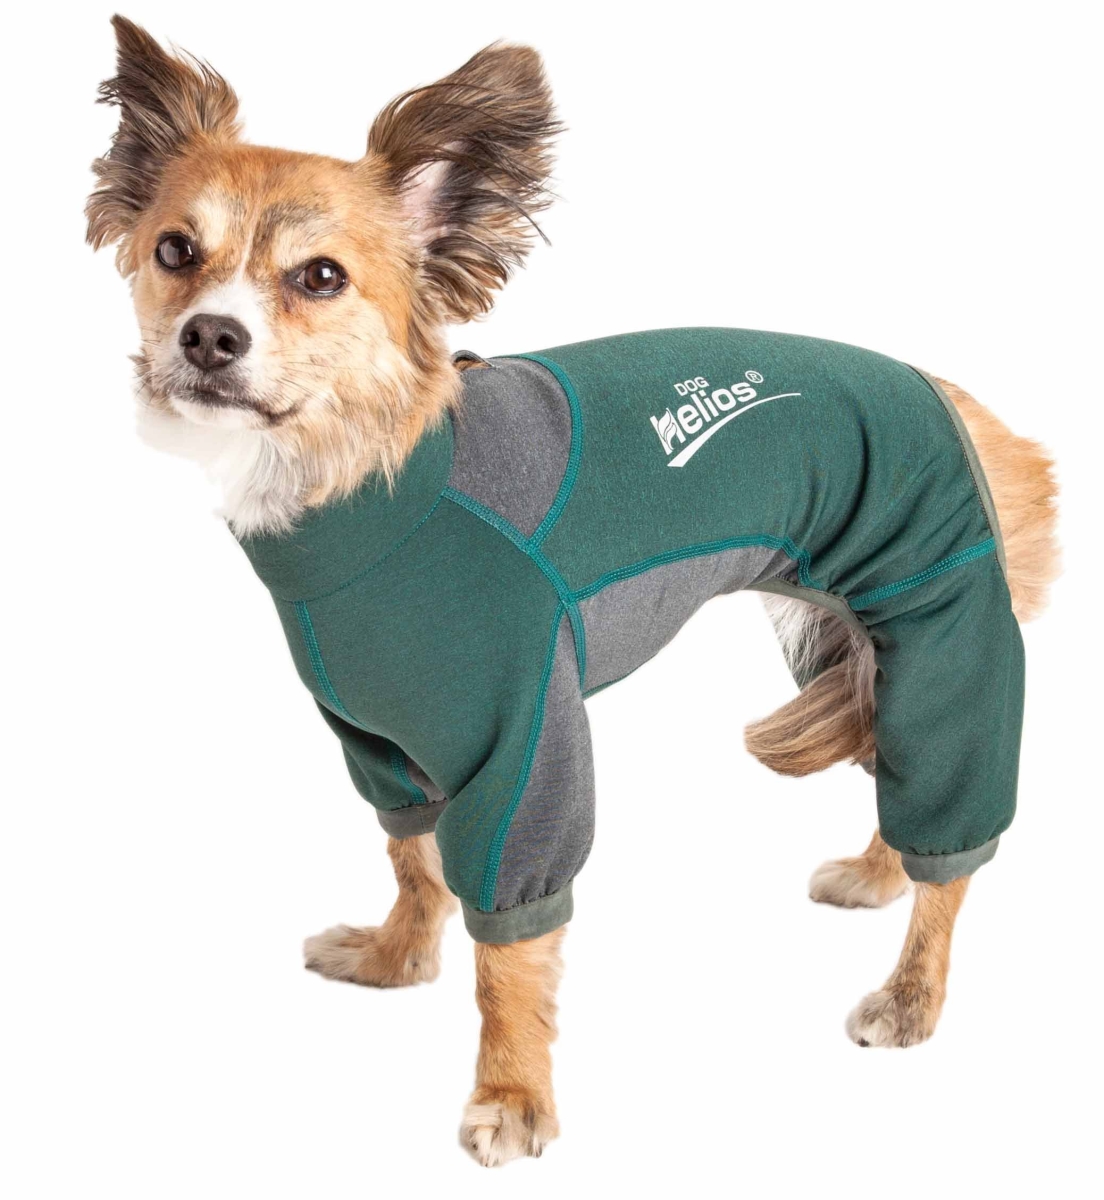 Yghl8gnxs Rufflex 4-way-stretch Breathable Full Bodied Performance Dog Warmup Track Suit - Green & Grey, Extra Small